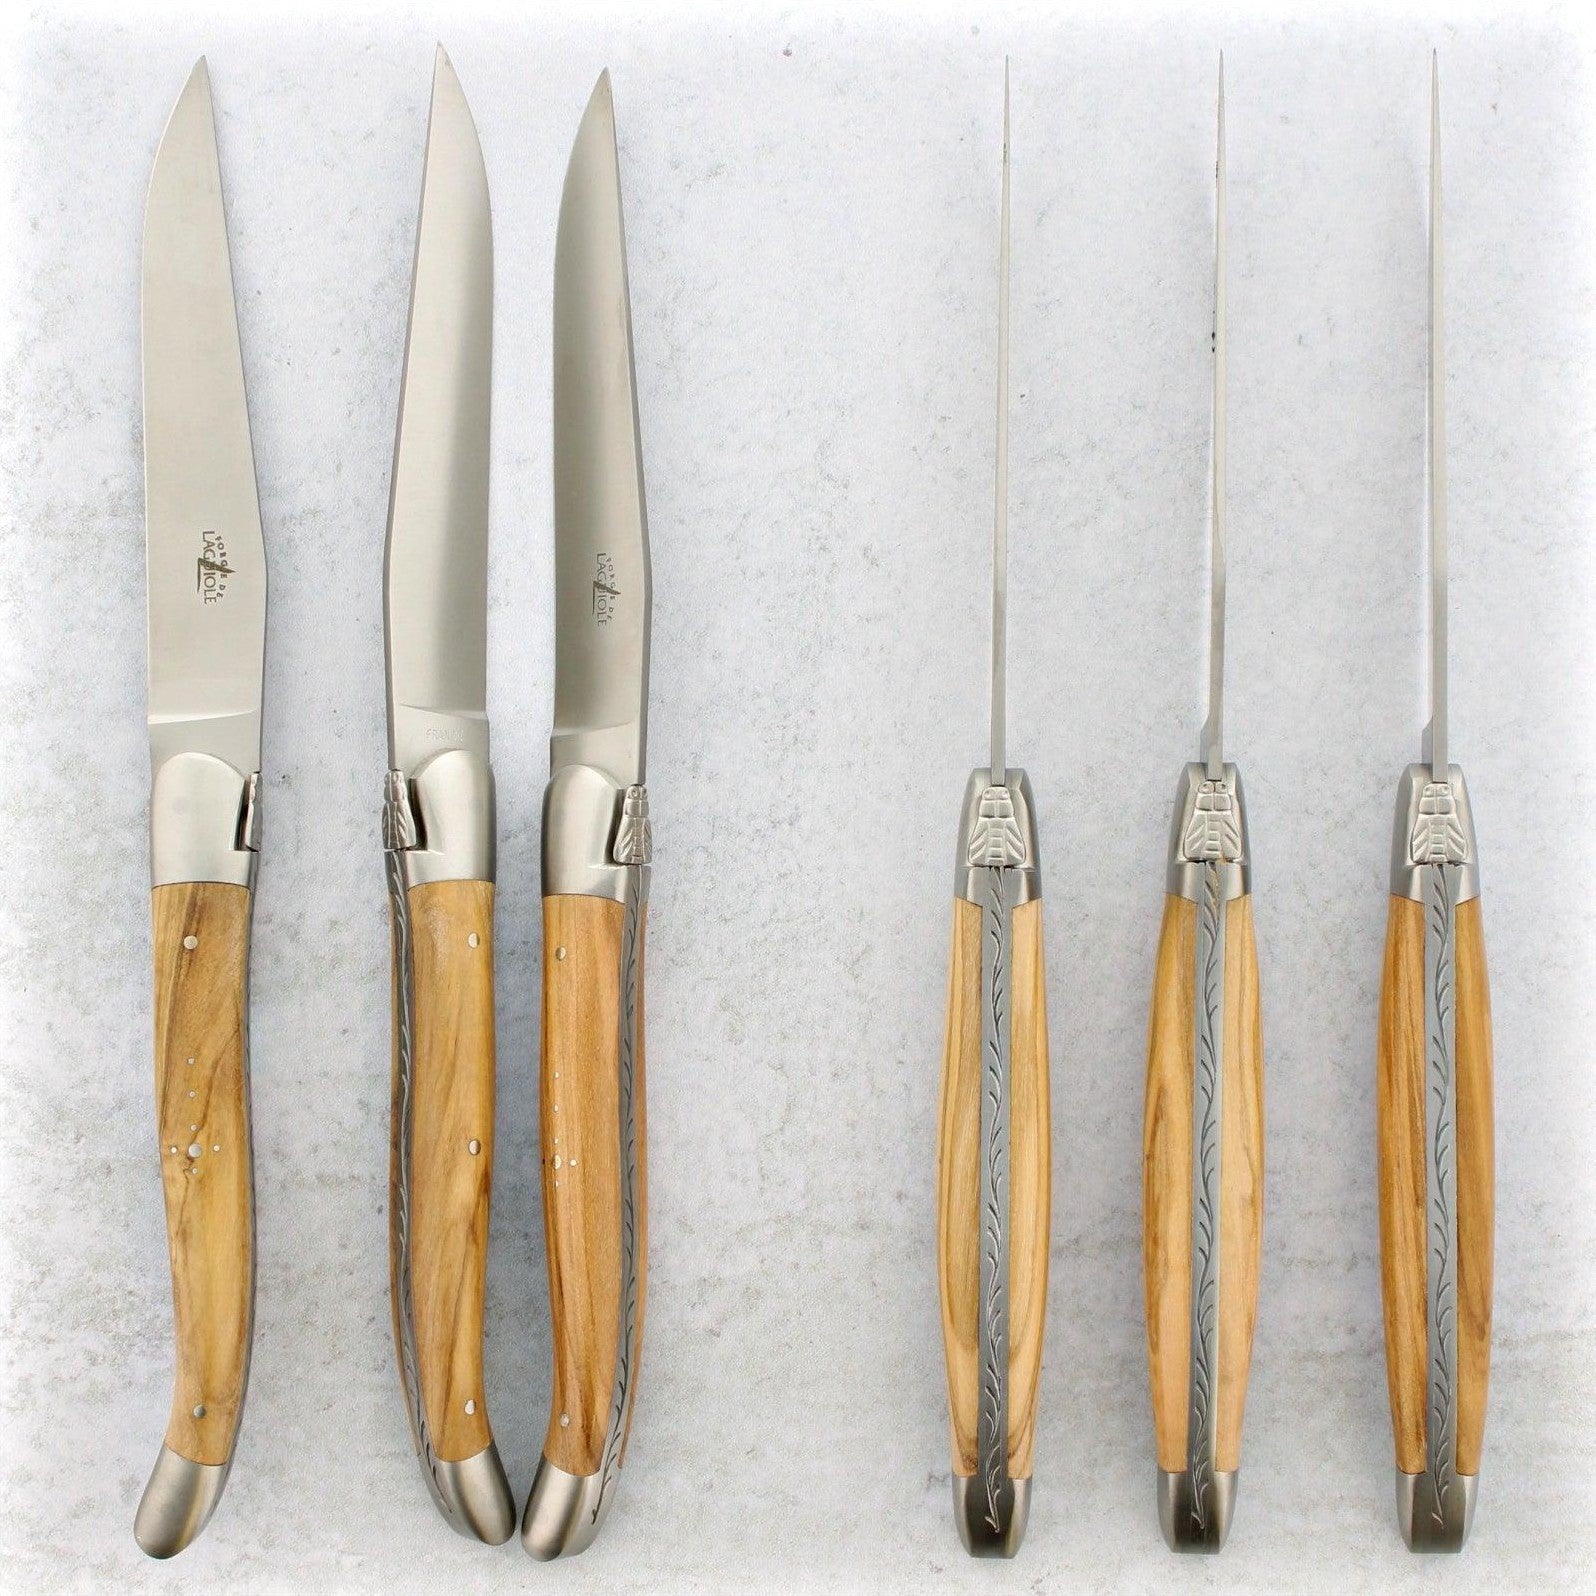 Wüsthof 10-Piece Stainless Steak and Carving Knife Set, Olivewood